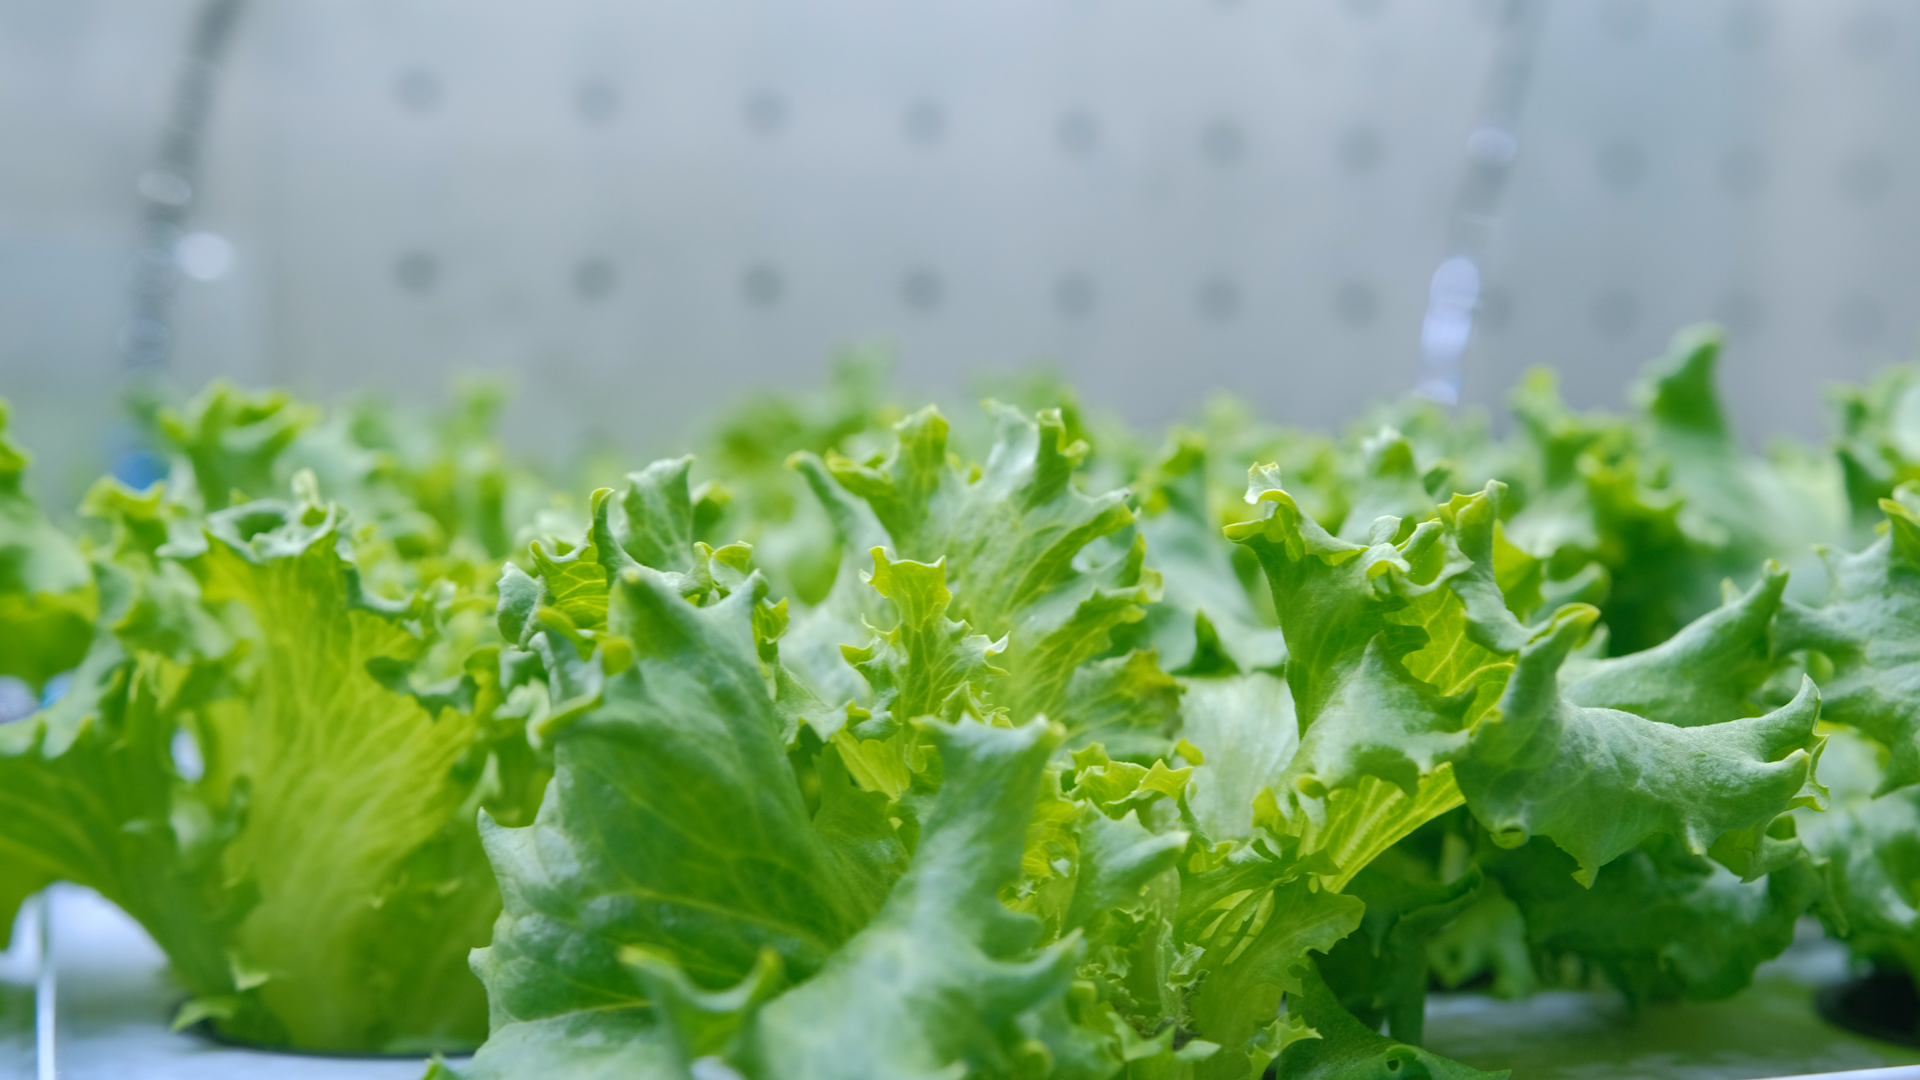 These lettuce plants have been grown in a ‘soil’ made of cellulose, with human urine as fertiliser